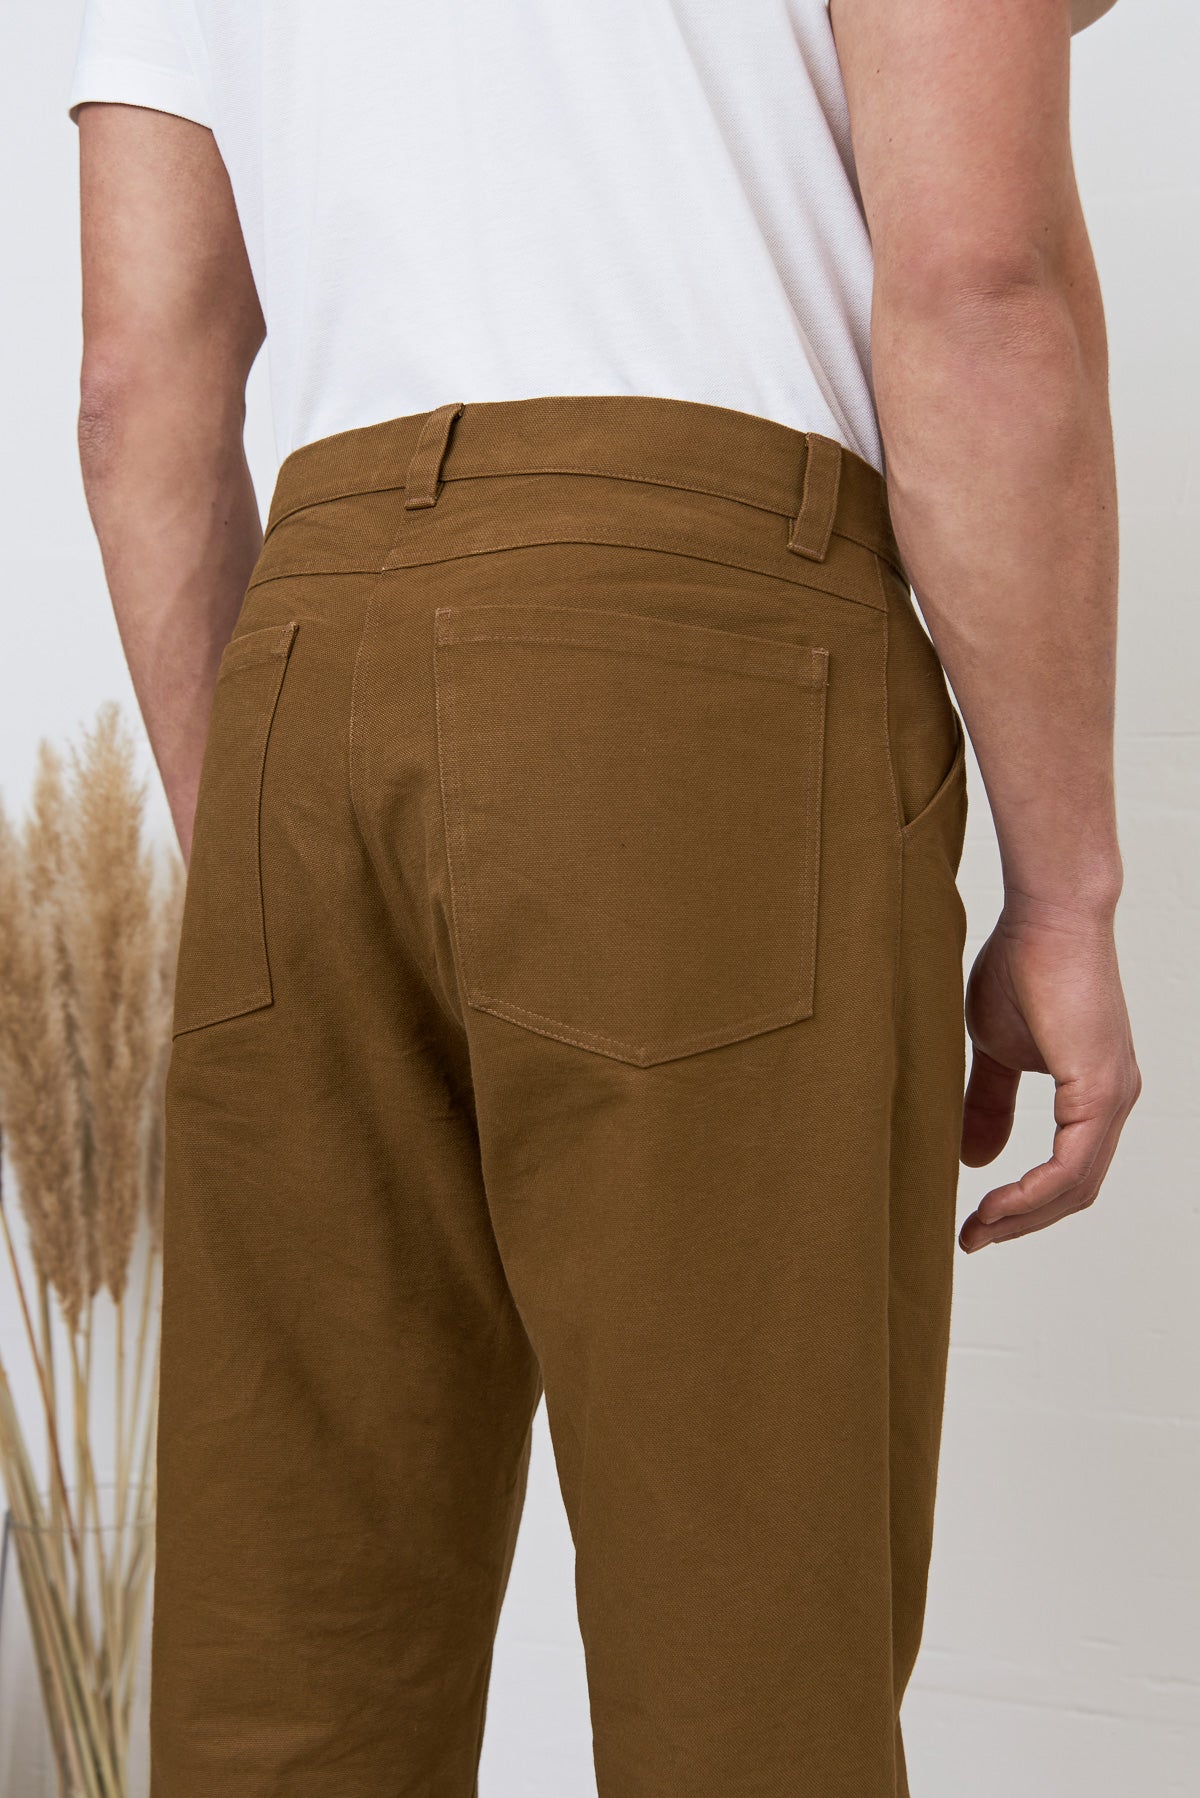 OLF trousers eco canvas camel 420g